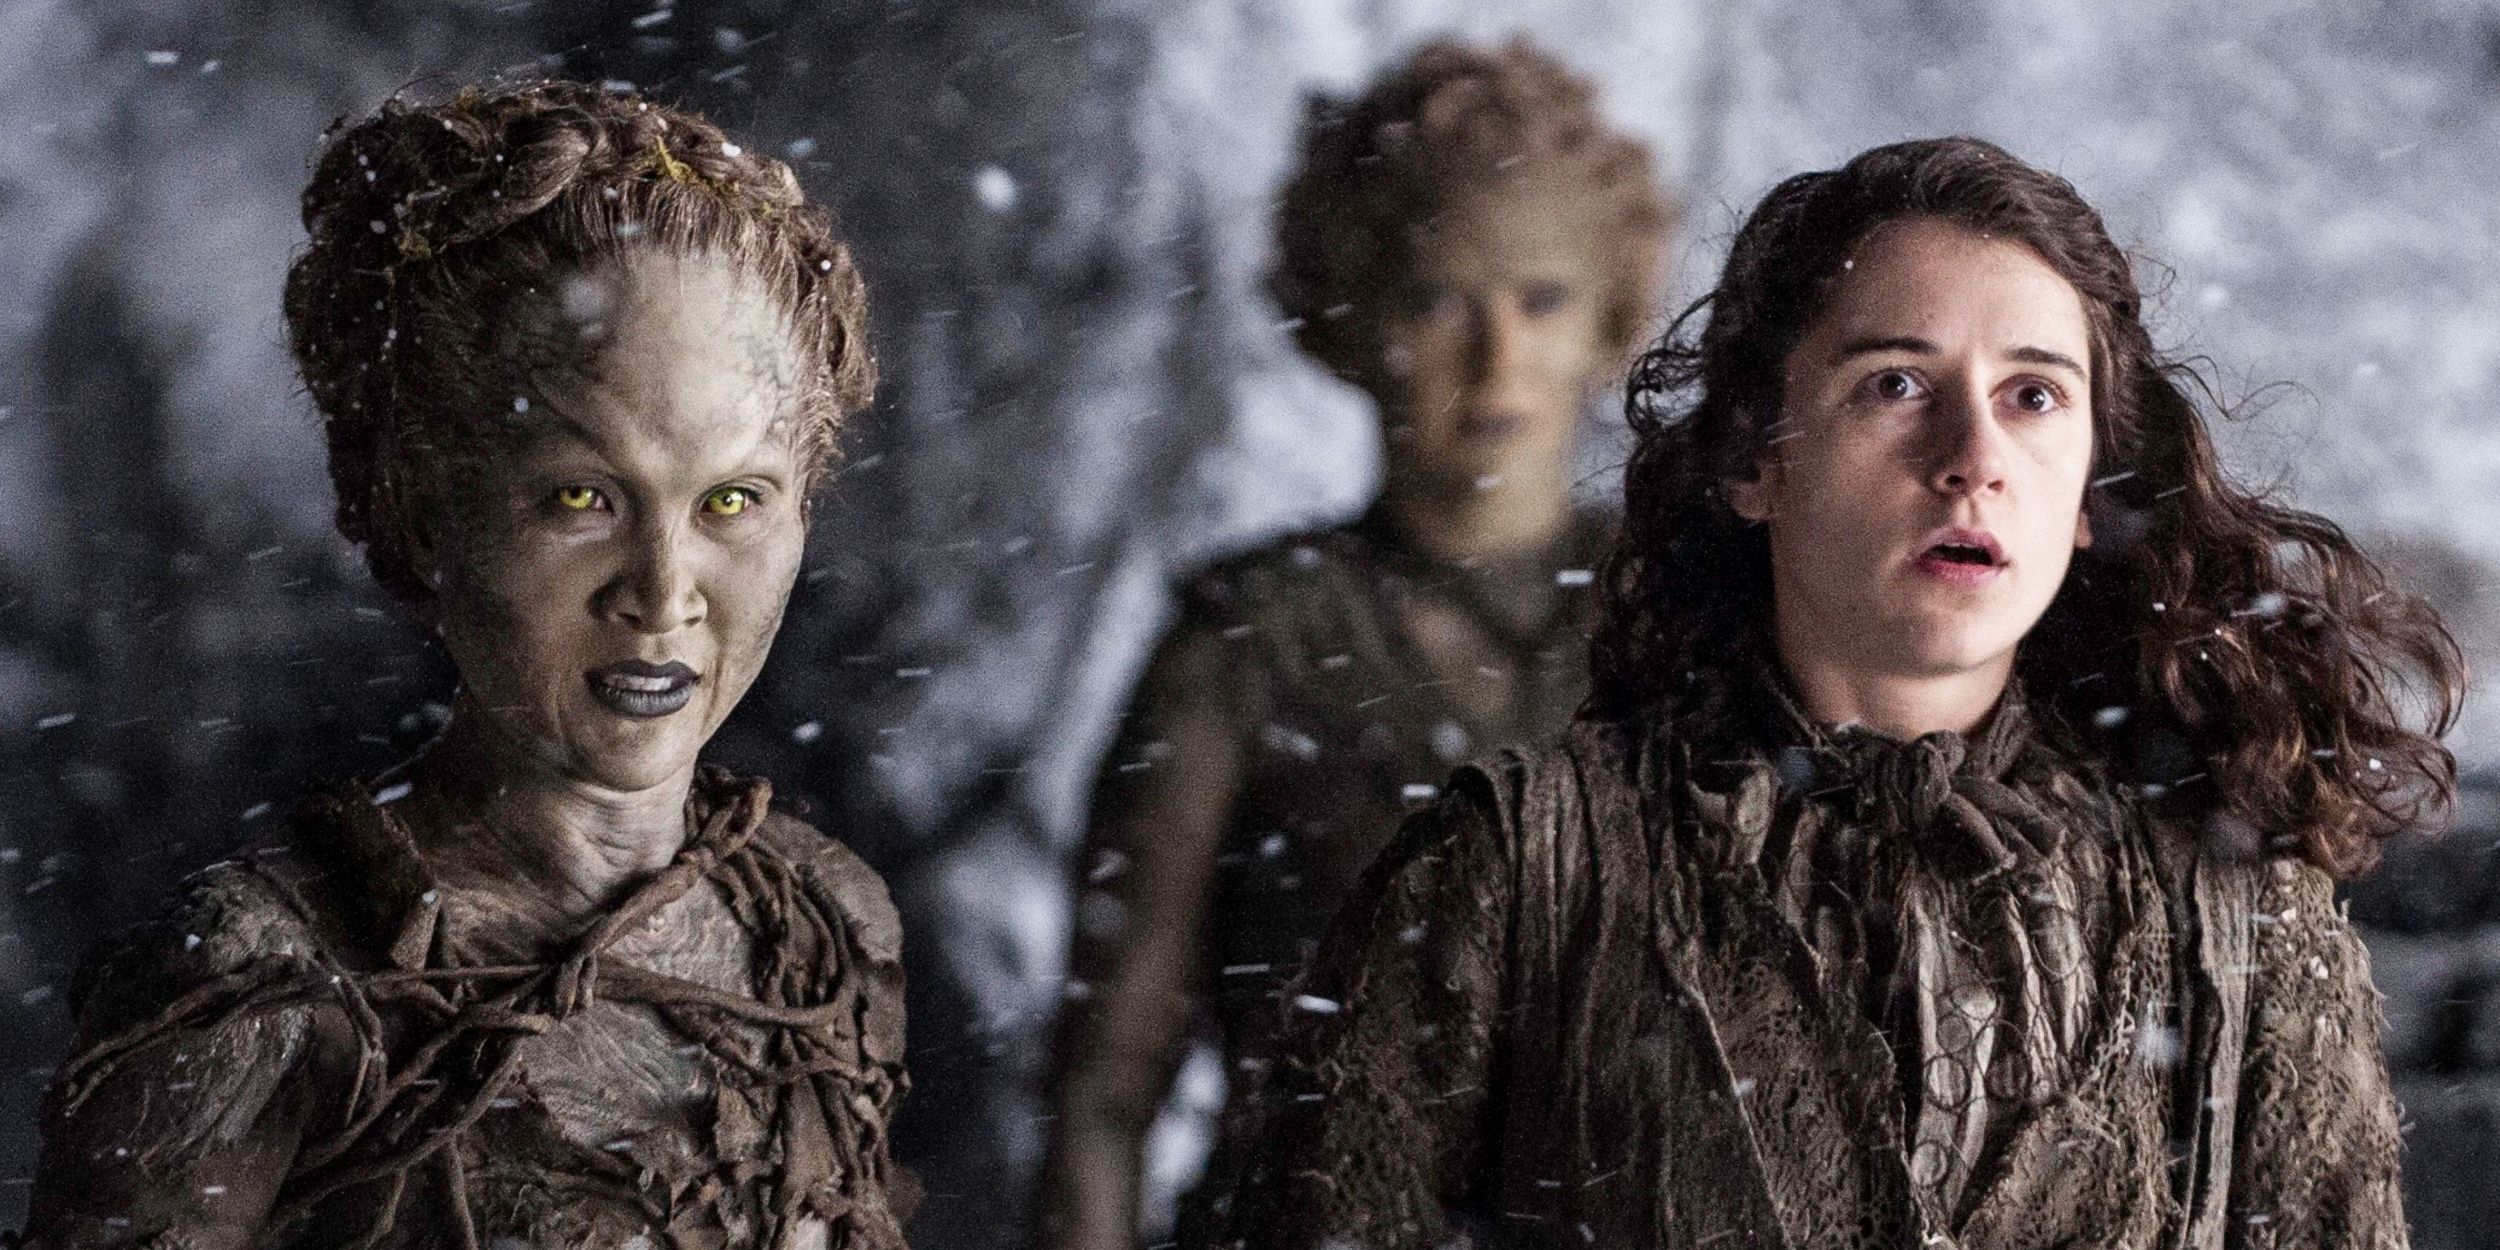 Meera (Ellie Kendrick) with the Children of the Forrest in 'Game of Thrones'